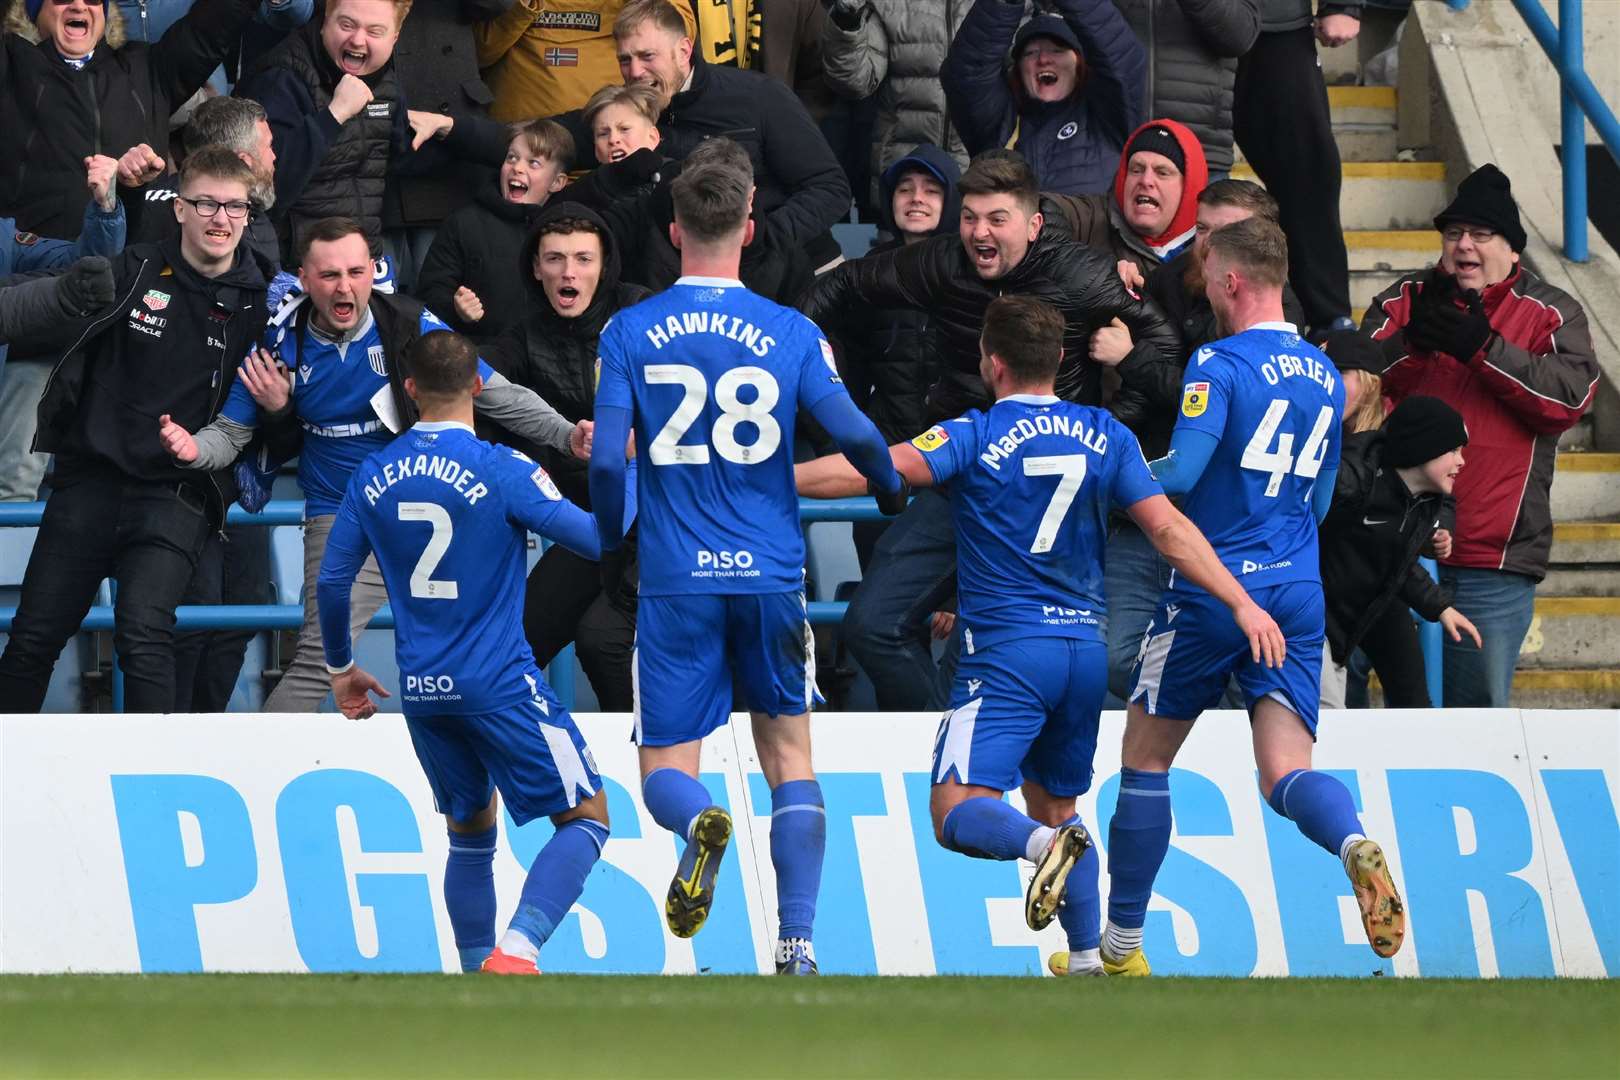 Gillingham celebrate their second goal scored by Cheye Alexander Picture: Keith Gillard